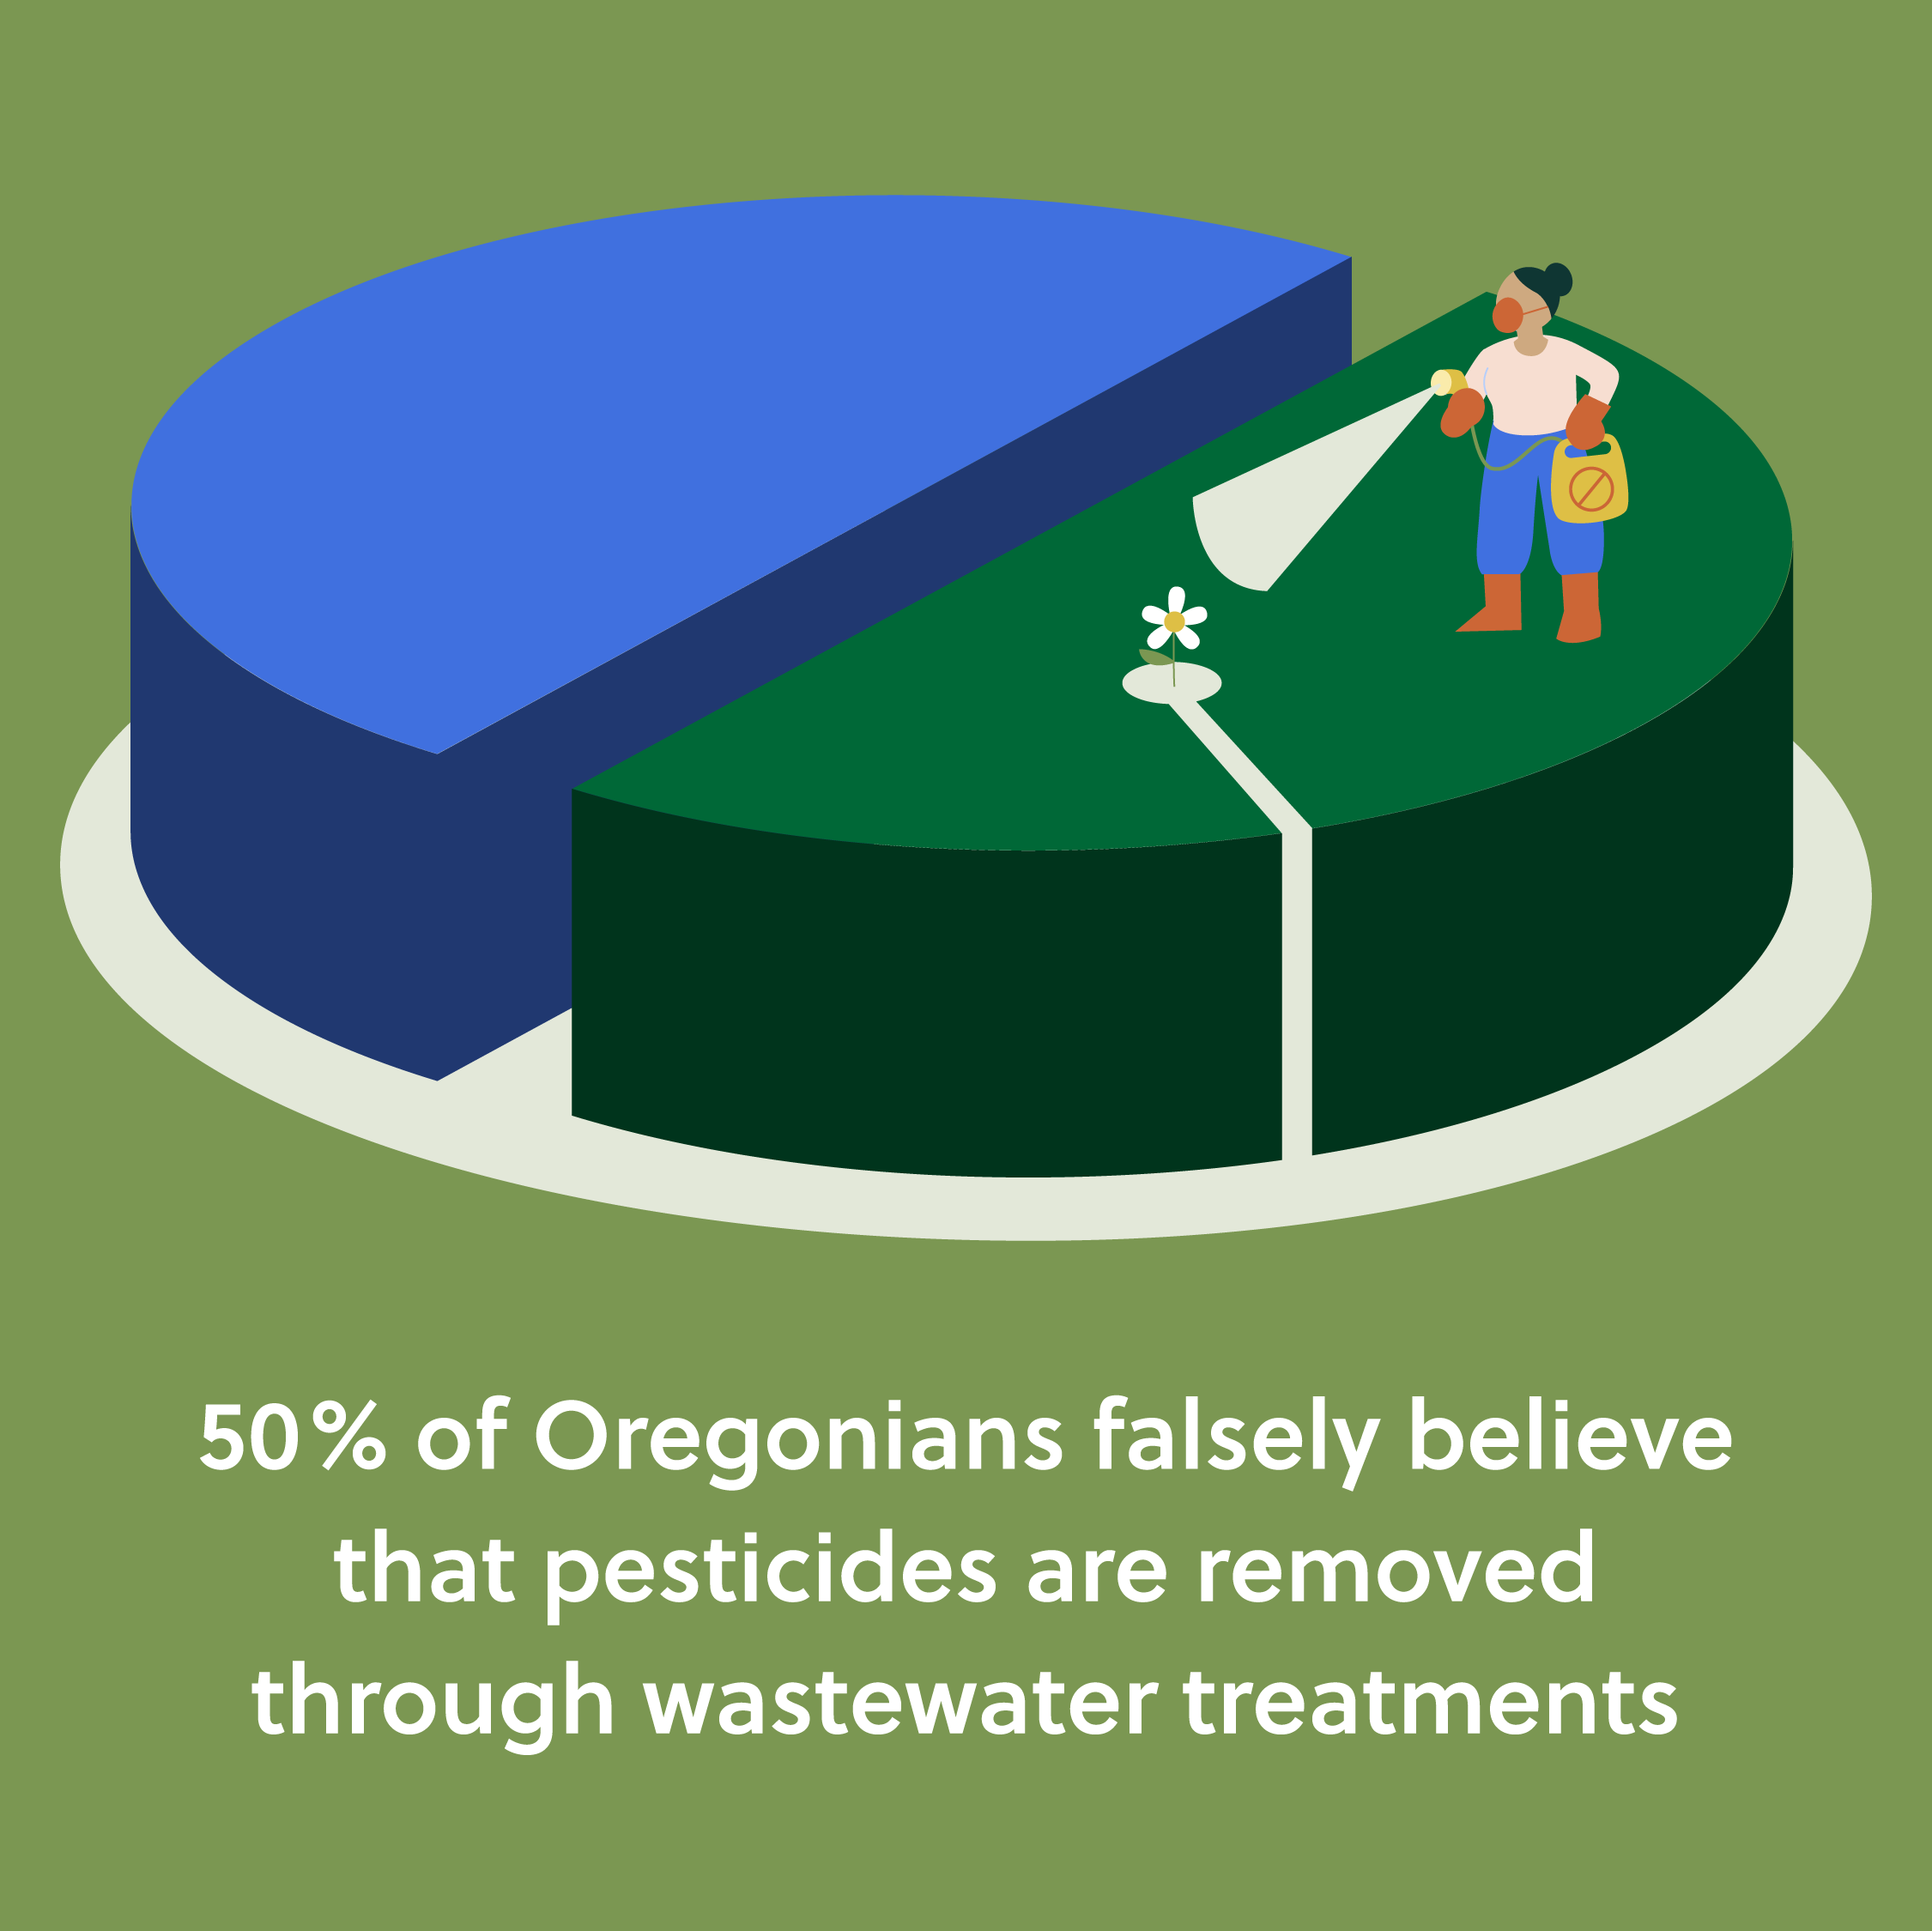 An infographic demonstrating that 50% of Oregonians falsely believe that pesticides are removed through wastewater treatments.